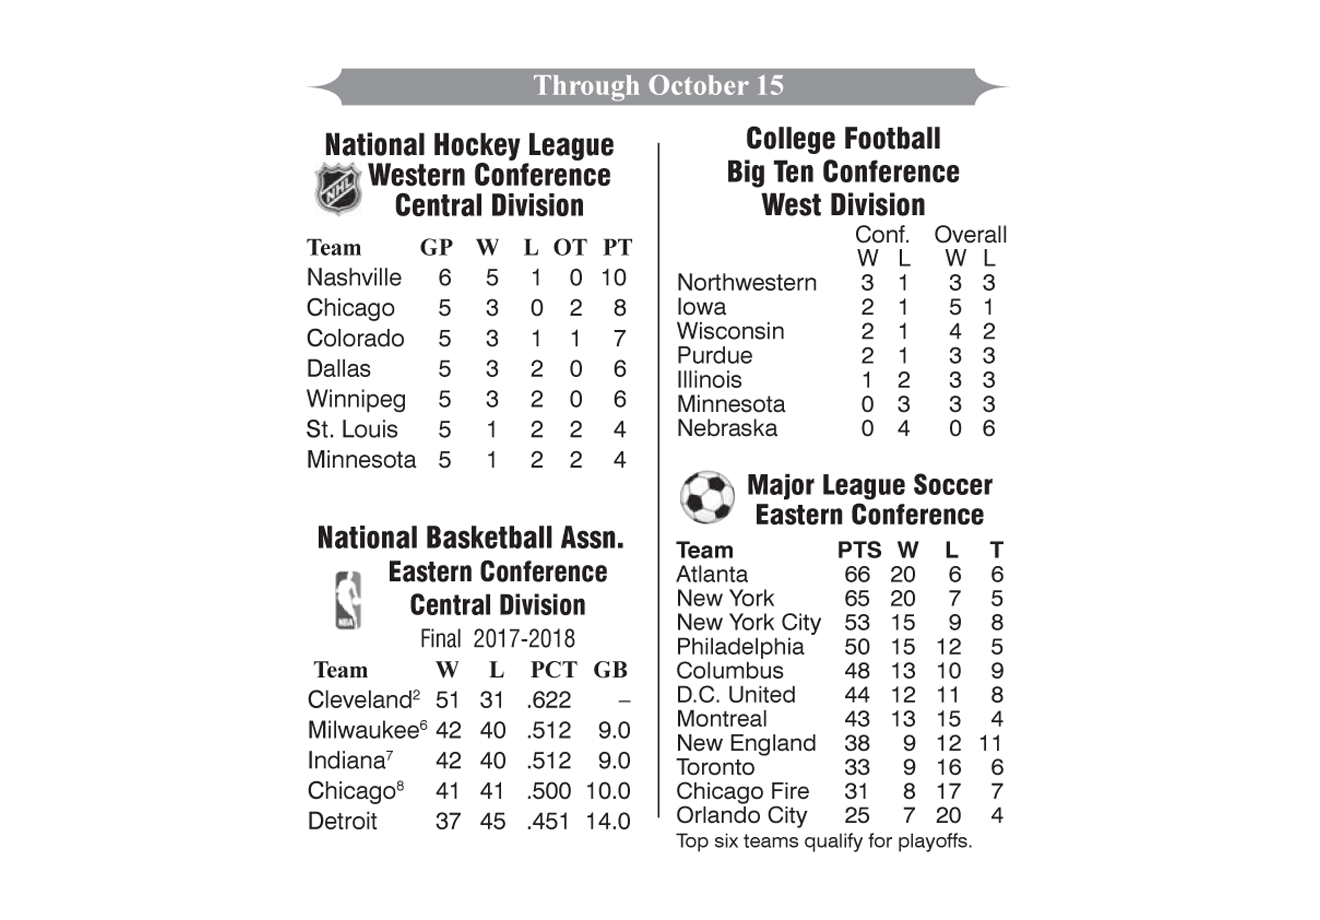 Professional Basketball, Football, Hockey, and Soccer Standings Through October 15, 2018